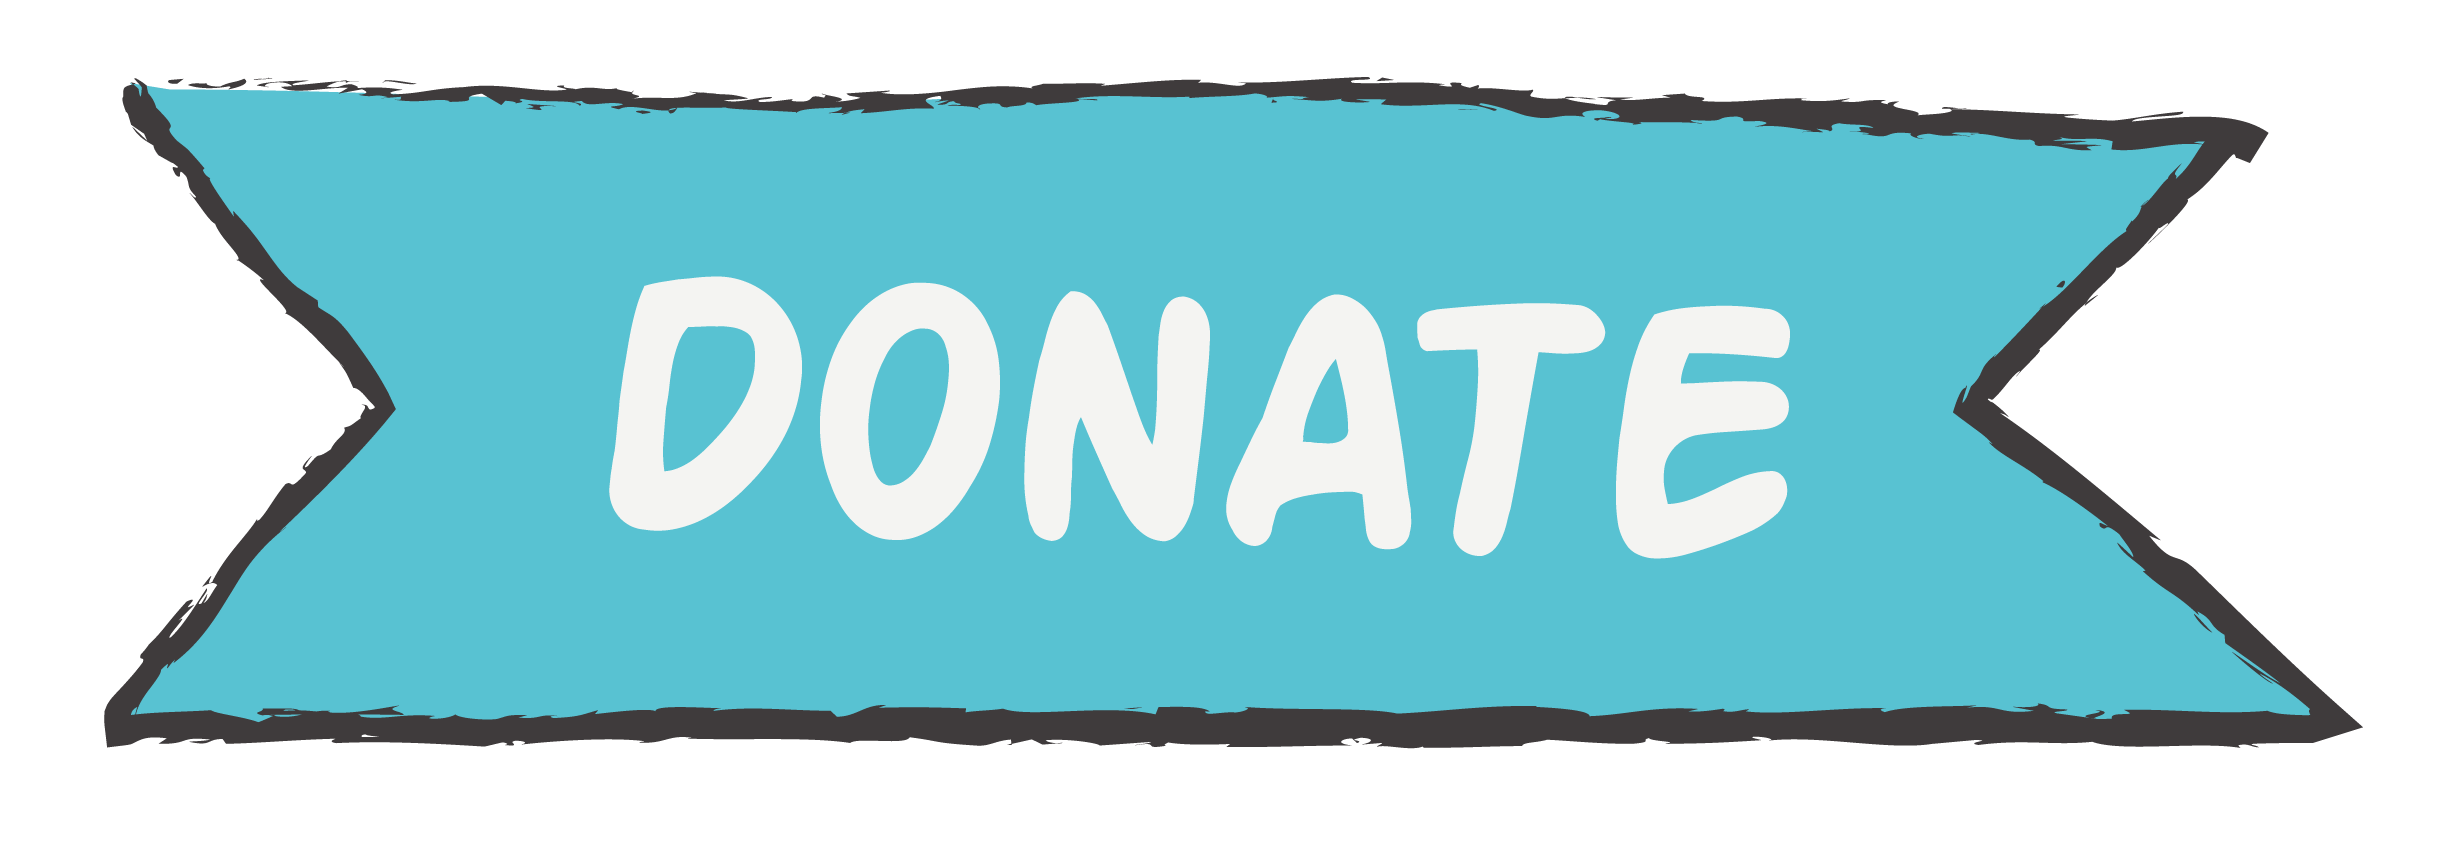 Donate PNG Images Transparent Background | PNG Play